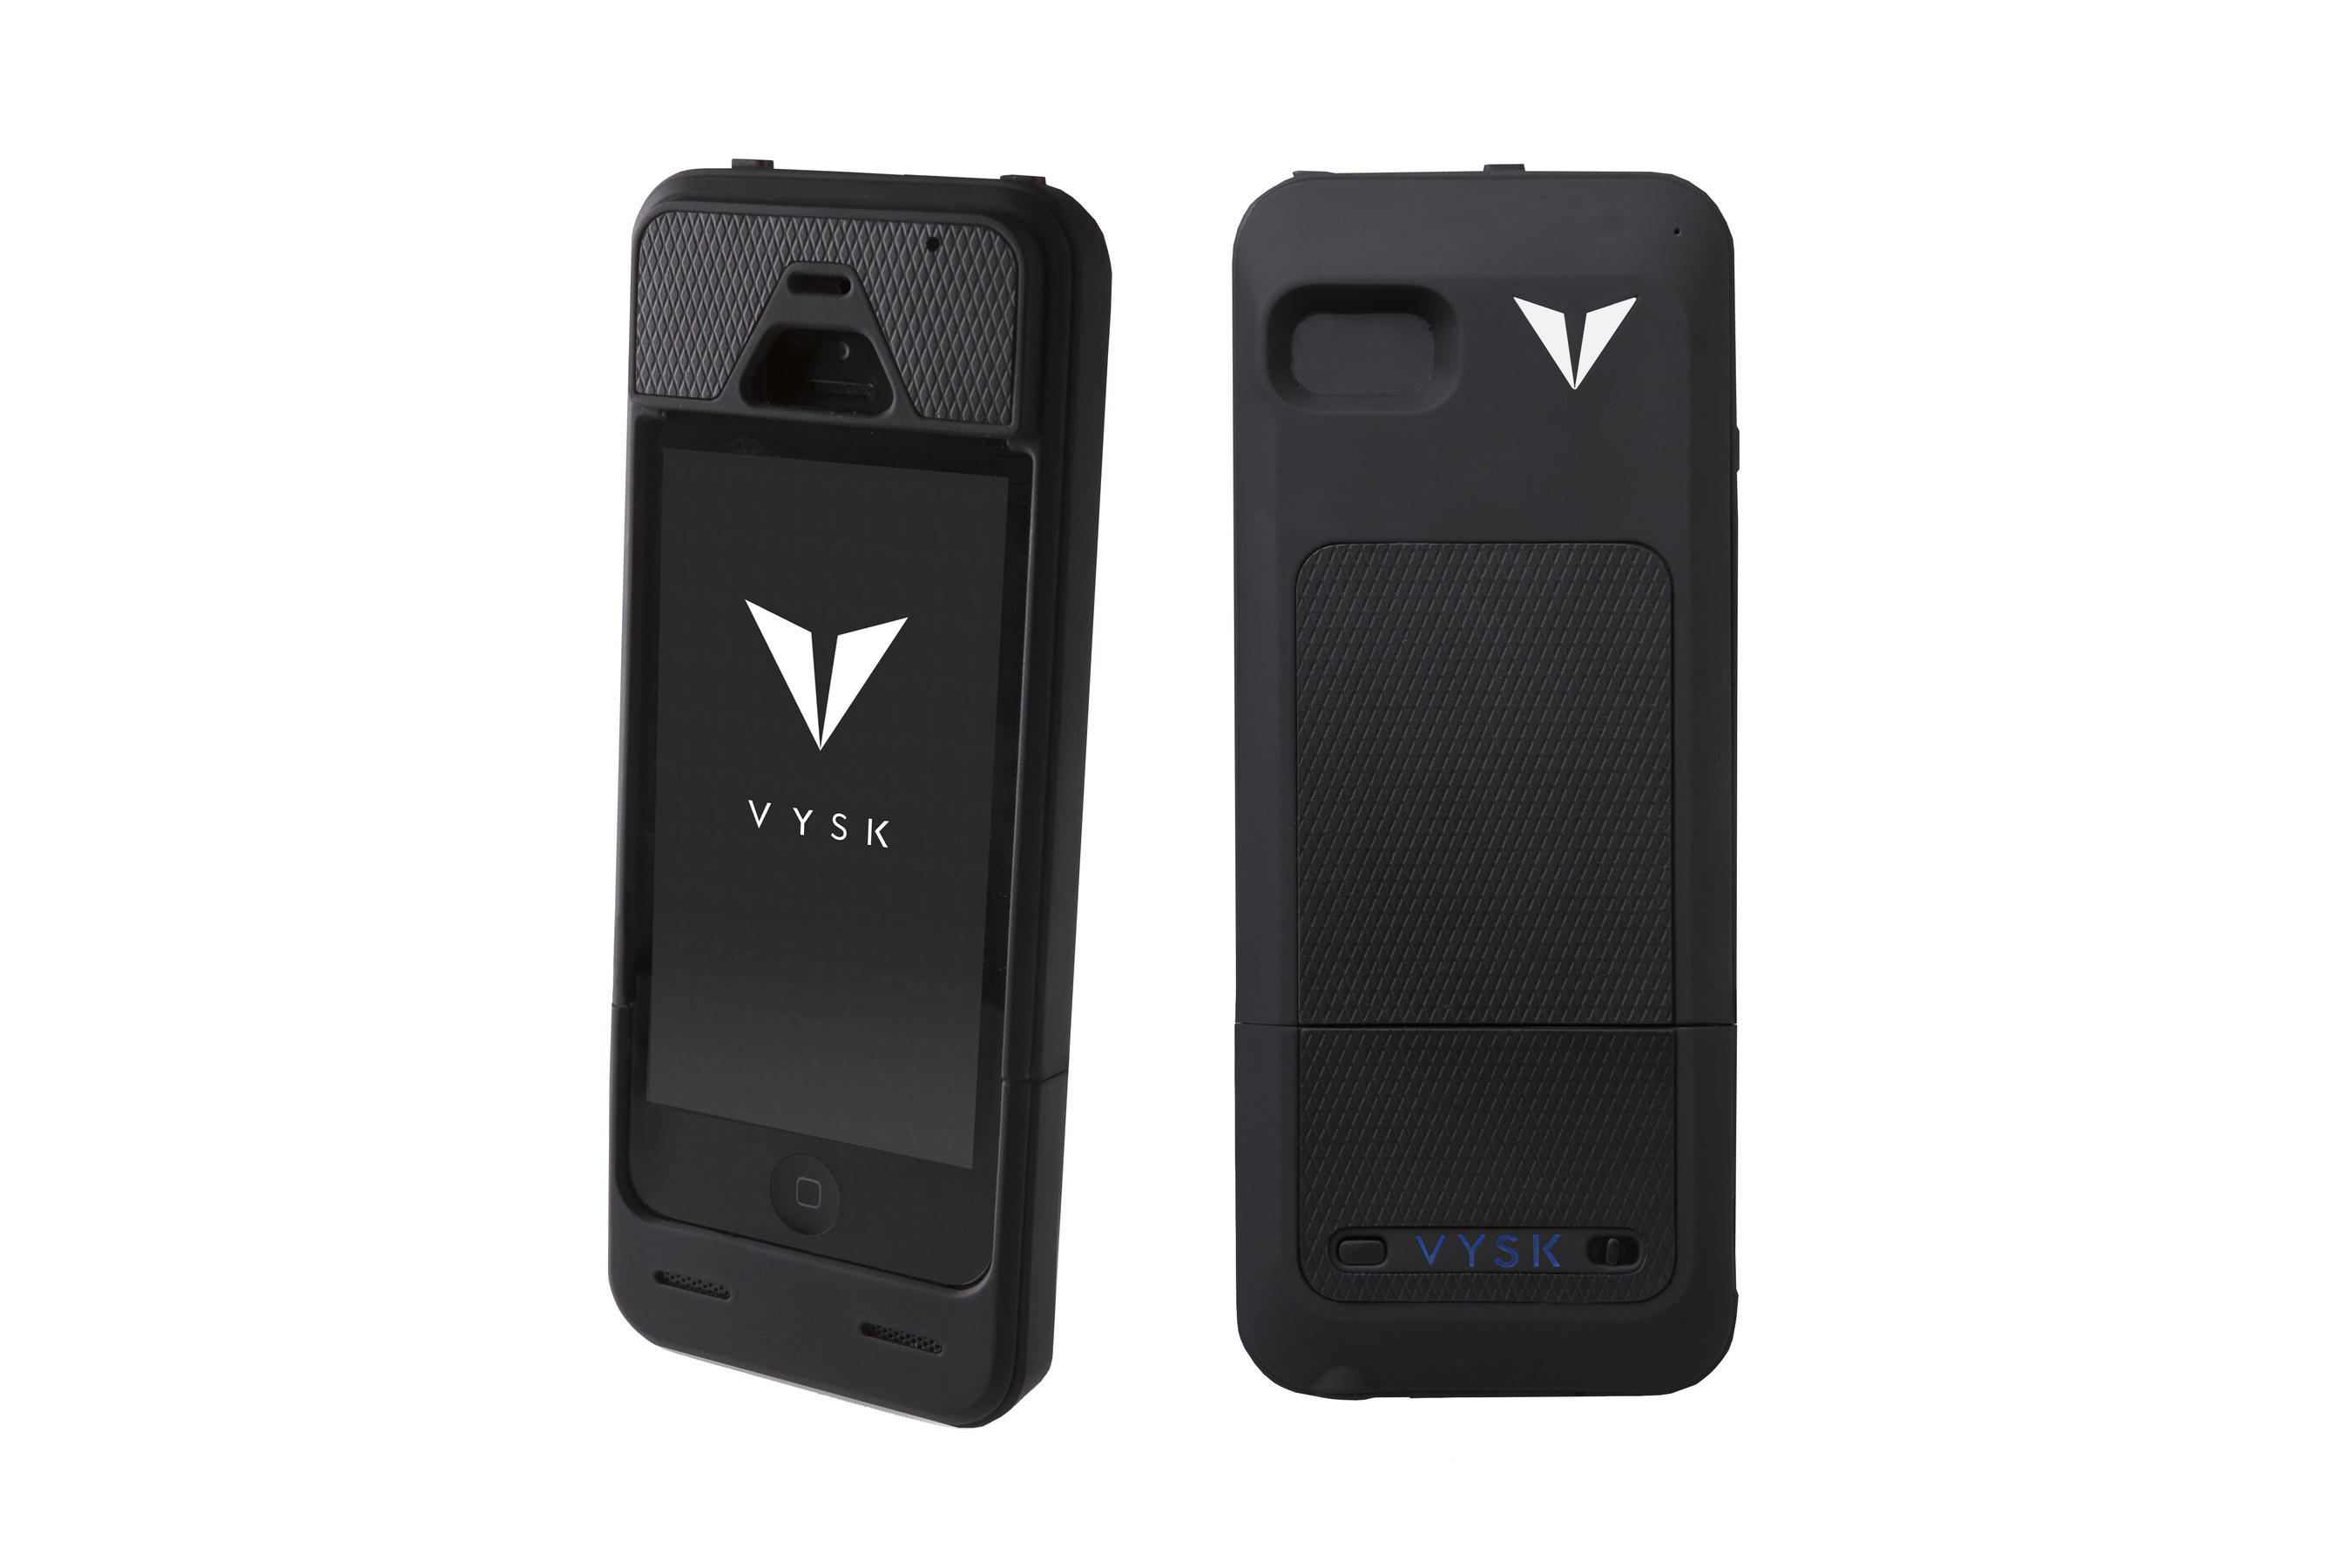 Vysk Communications today unveiled the Vysk QS1, a protective smartphone case that makes it virtually impossible for others to eavesdrop on and capture your conversations. A proprietary processor encrypts calls right inside the case, while placing cameras and microphones on absolute lockdown, and providing for encrypted texting. The Vysk privacy system also prevents any metadata trail from being created. Pre-orders will begin on May 15 at http://www.VYSK.com and via Enterprise sales channels. Delivery is scheduled for early fourth quarter 2014. MSRP will be $229. The Vysk QS1 is made in the USA. (PRNewsFoto/Vysk Communications)